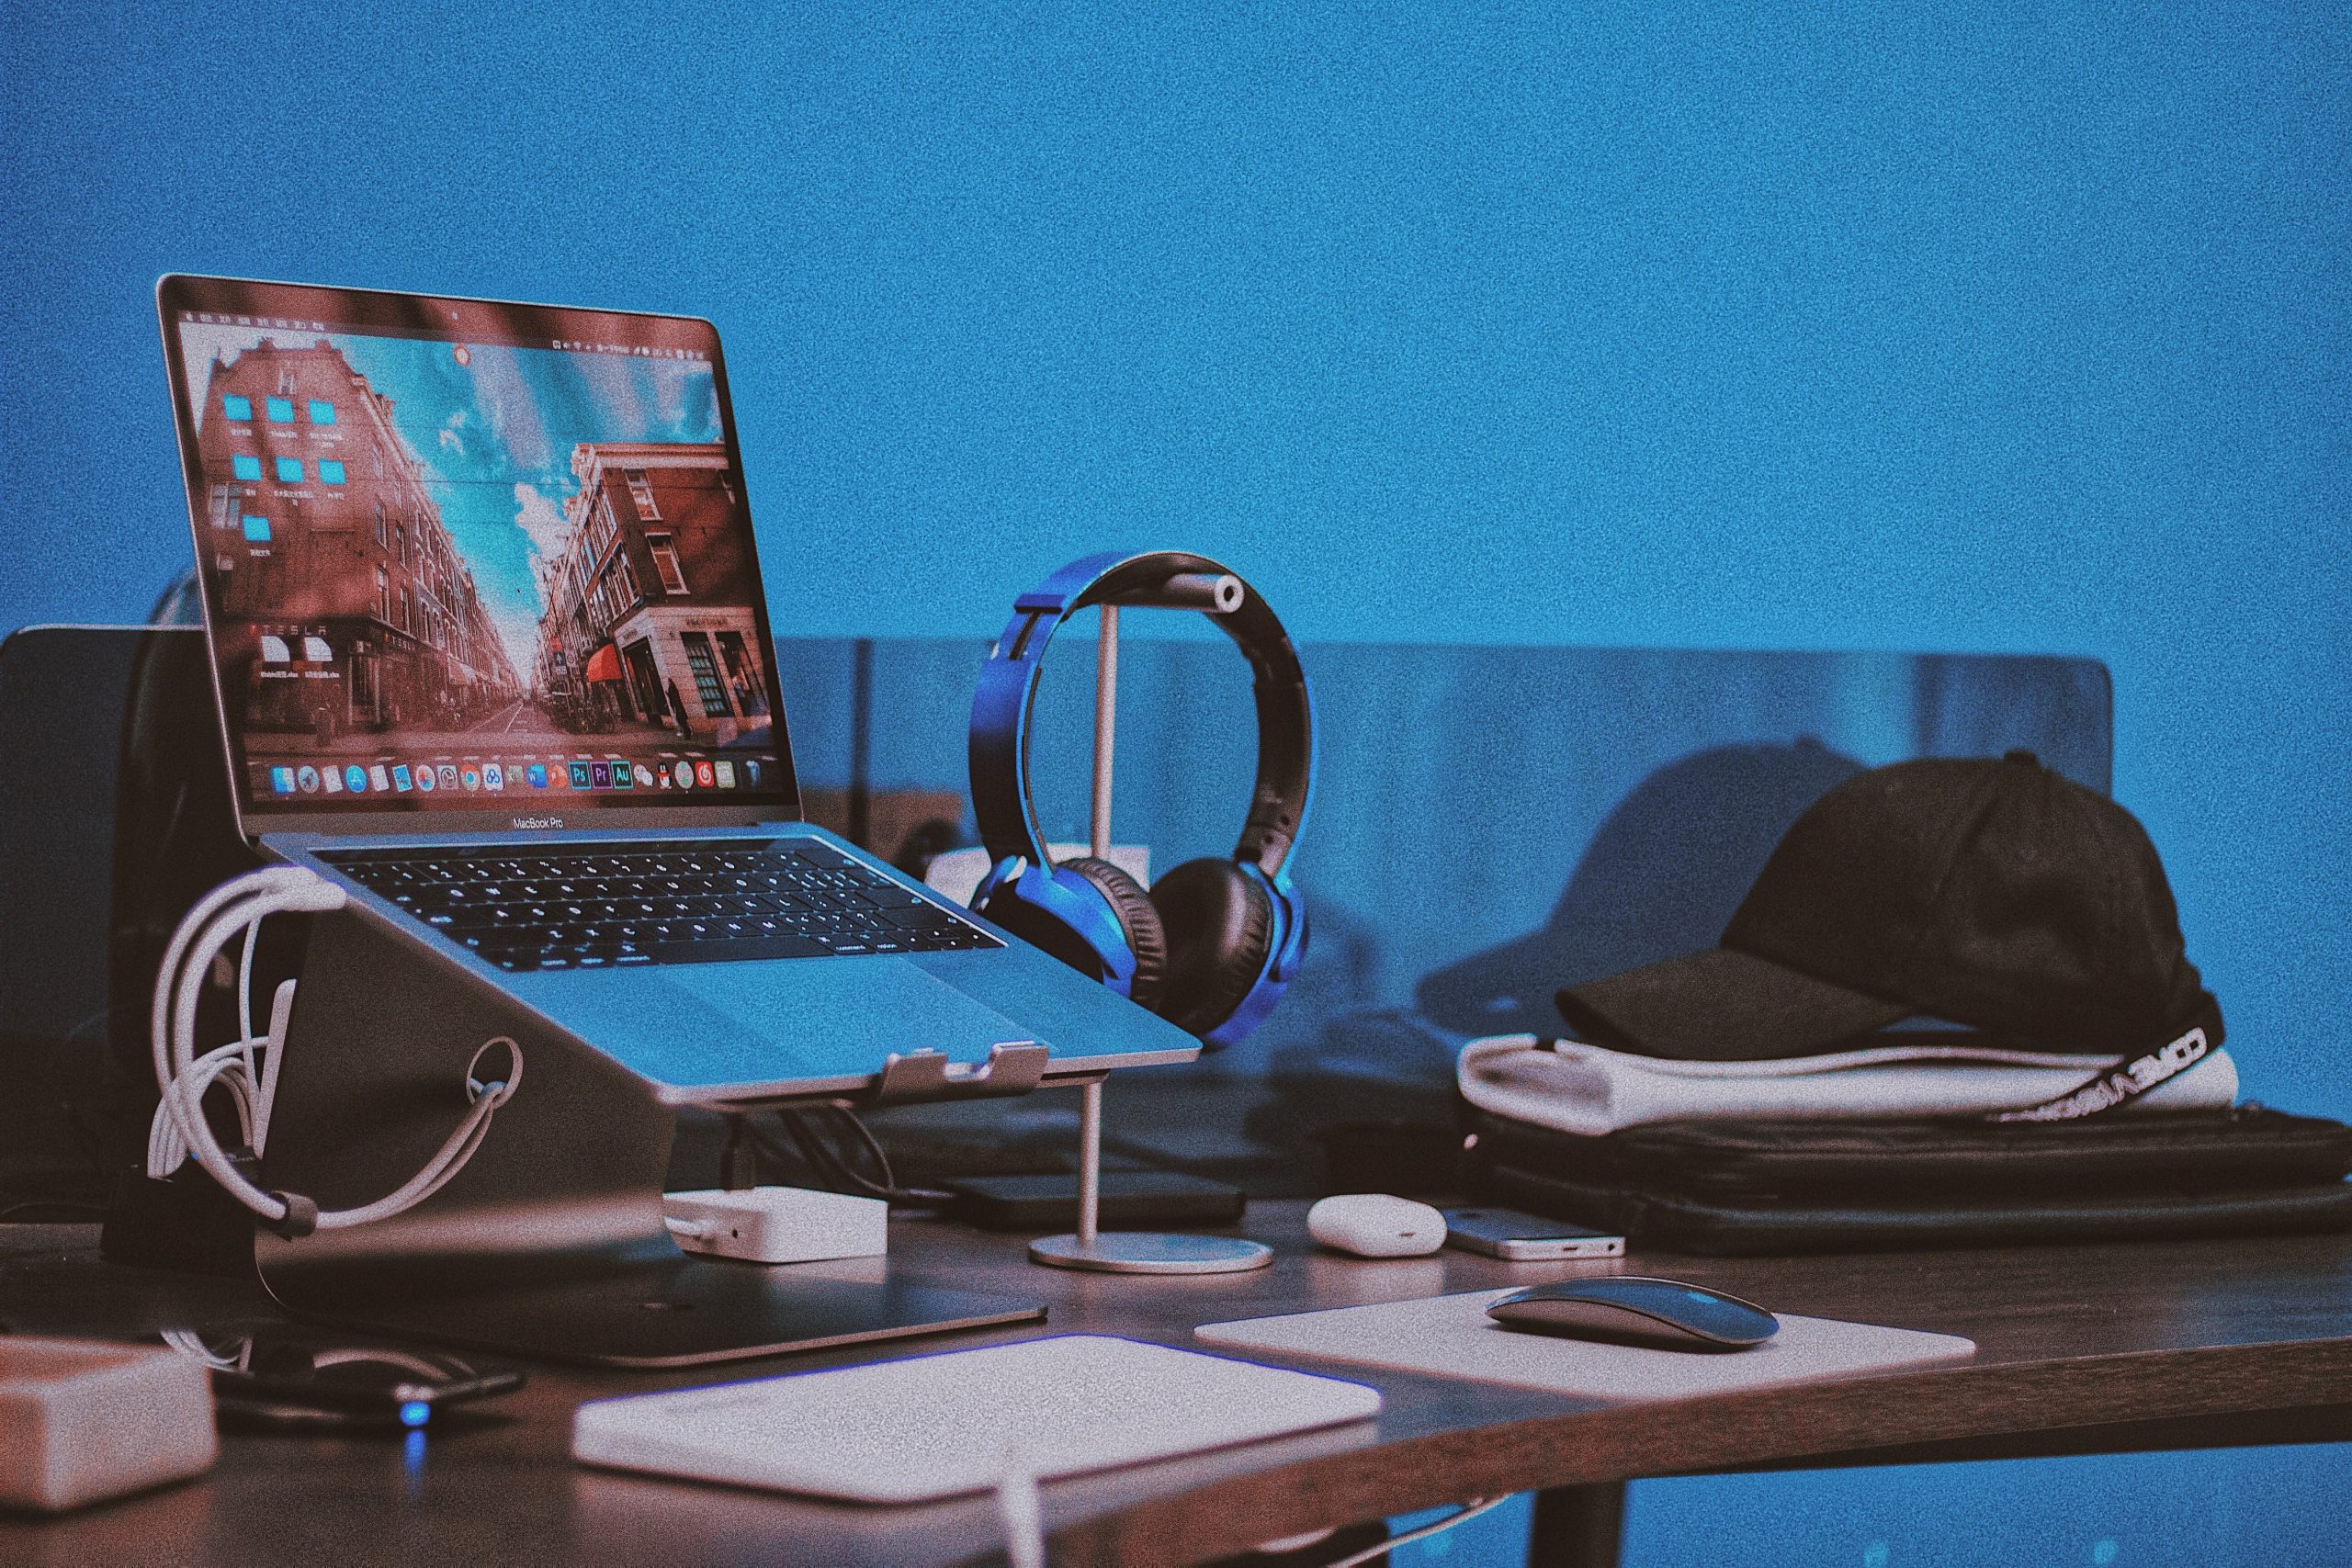 Macbook on a deskstand attached to audio peripherals and headphones